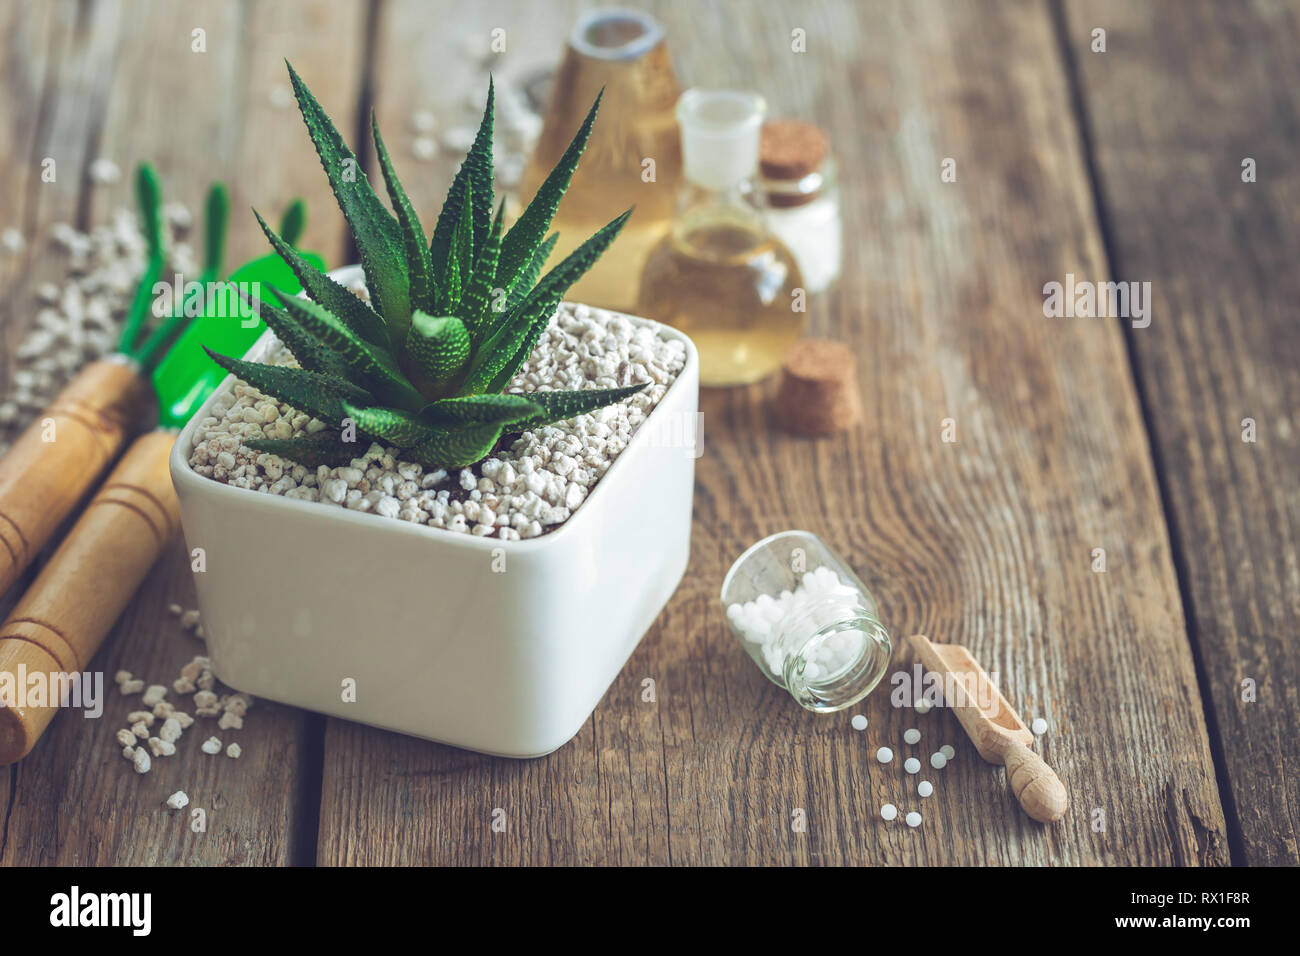 Haworthia succulent in flower pot, mini garden tools and homeopathic remedies for plant. Natural alternative treatment of plant diseases. Stock Photo